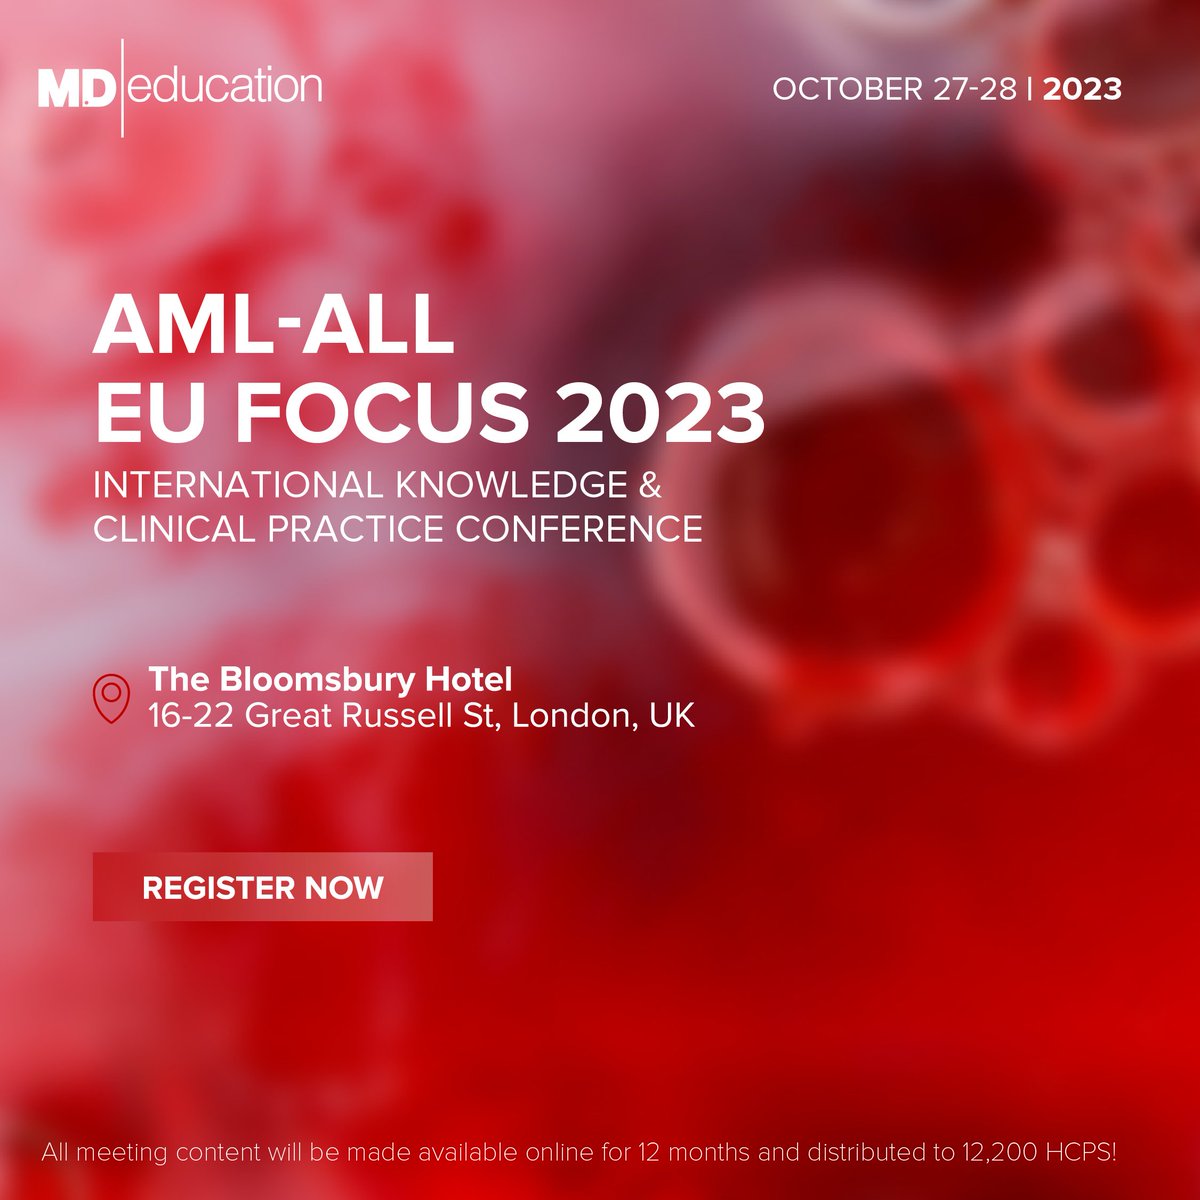 📅 Mark your calendars! AML-ALL EU Focus 2023 is happening at The Bloomsbury Hotel, London, 27-28 Oct! Dive deep into global AML & ALL research, network with experts, & join vibrant discussions. 

🌍✨ 🔗 Register today: aml-alleu2023.md-education.com

#AMLALLEUFocus2023 #MedicalEvent…